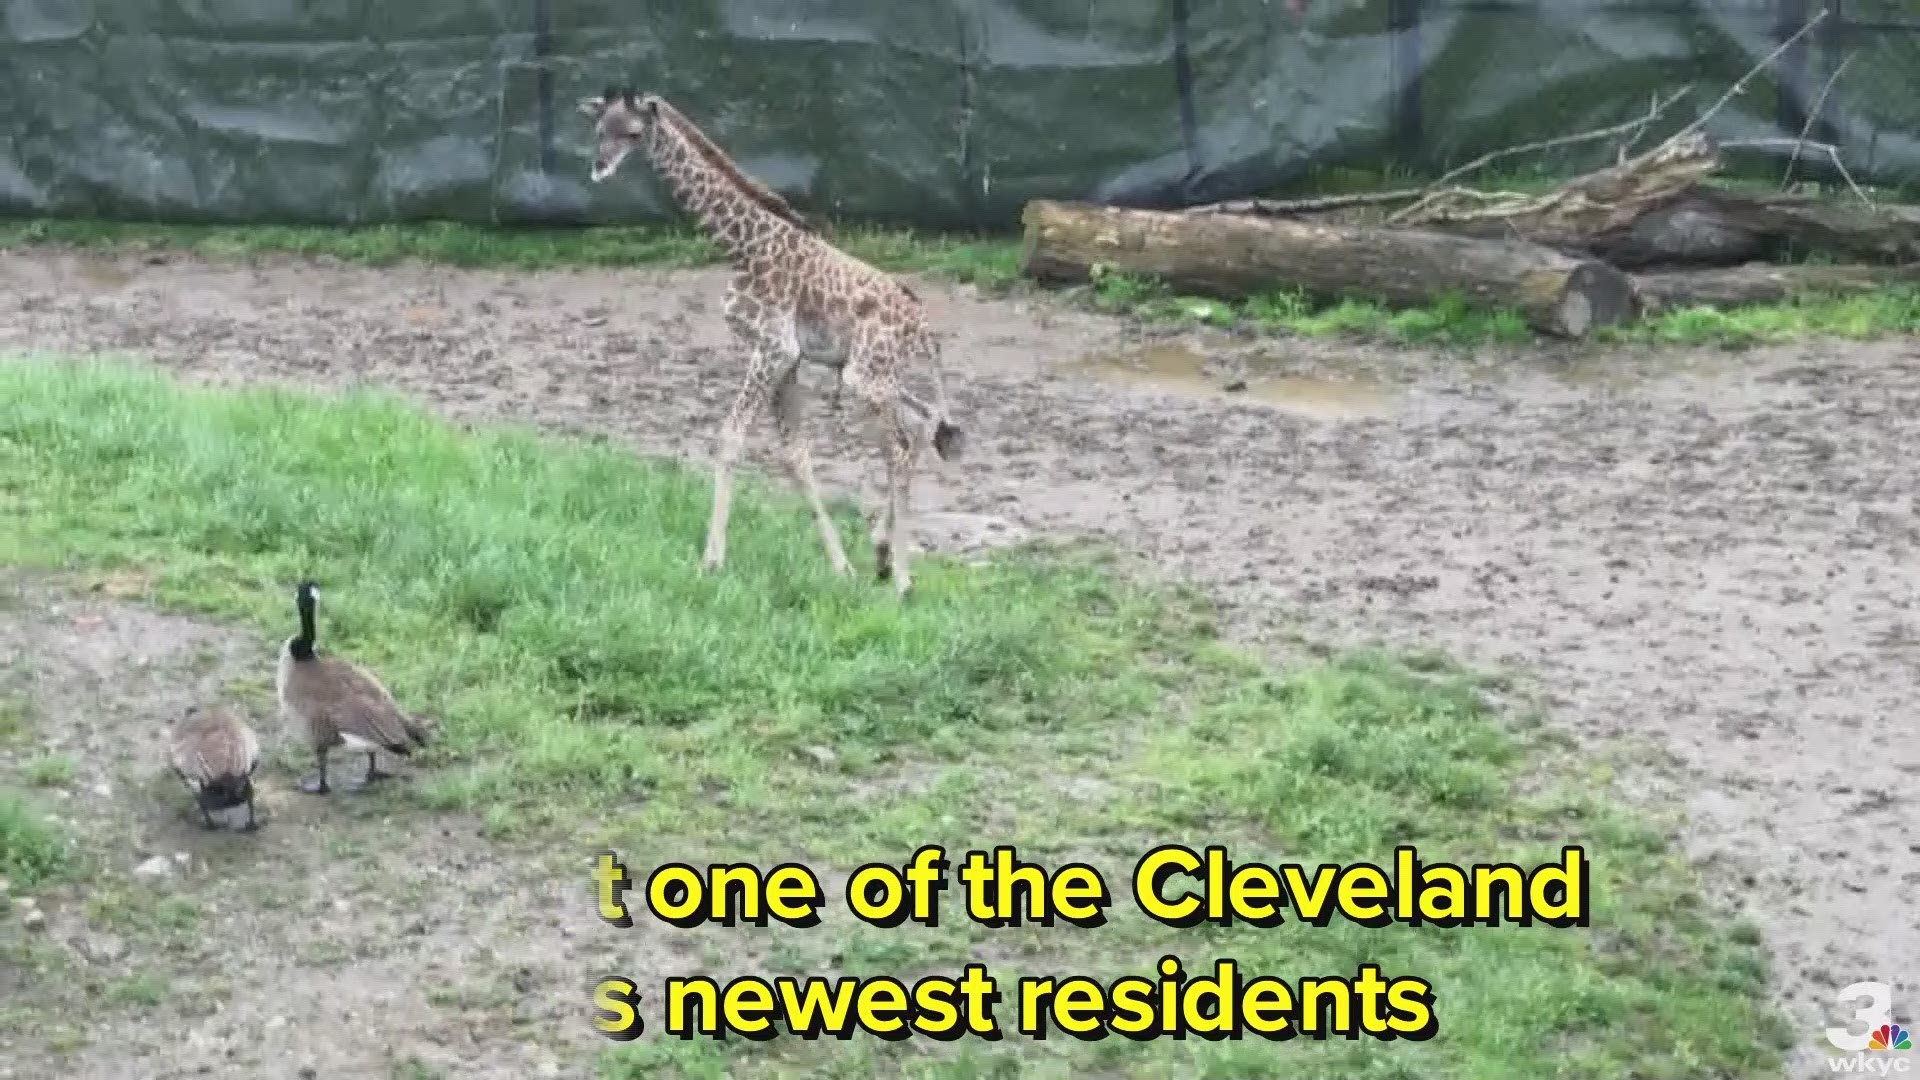 Meet one of the zoo's newest residents.